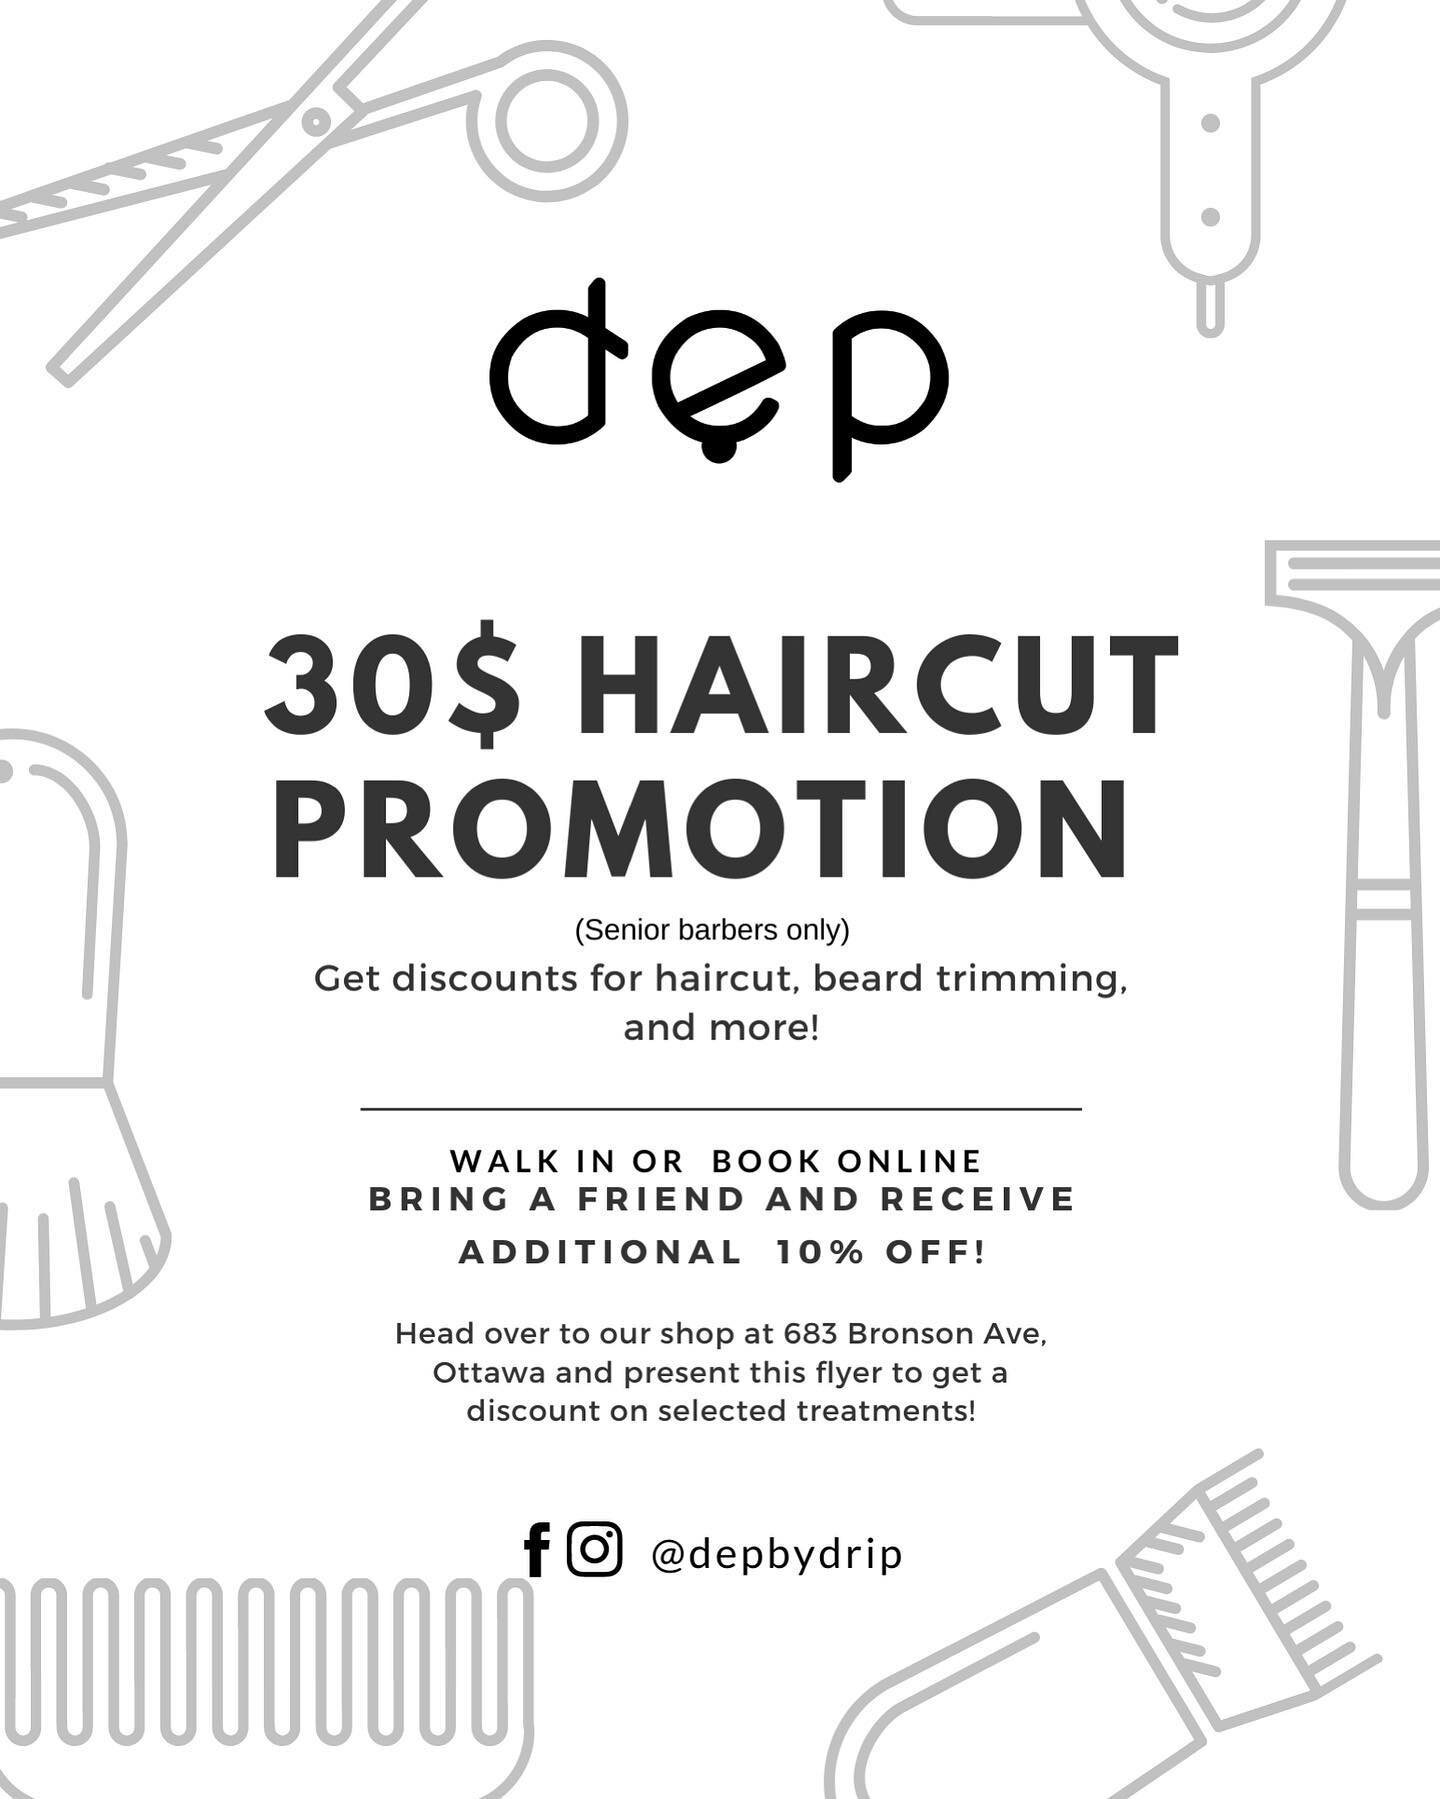 We are having 30$ haircut promotion now for any client who want to book or try us out! 

Please share with your friends!